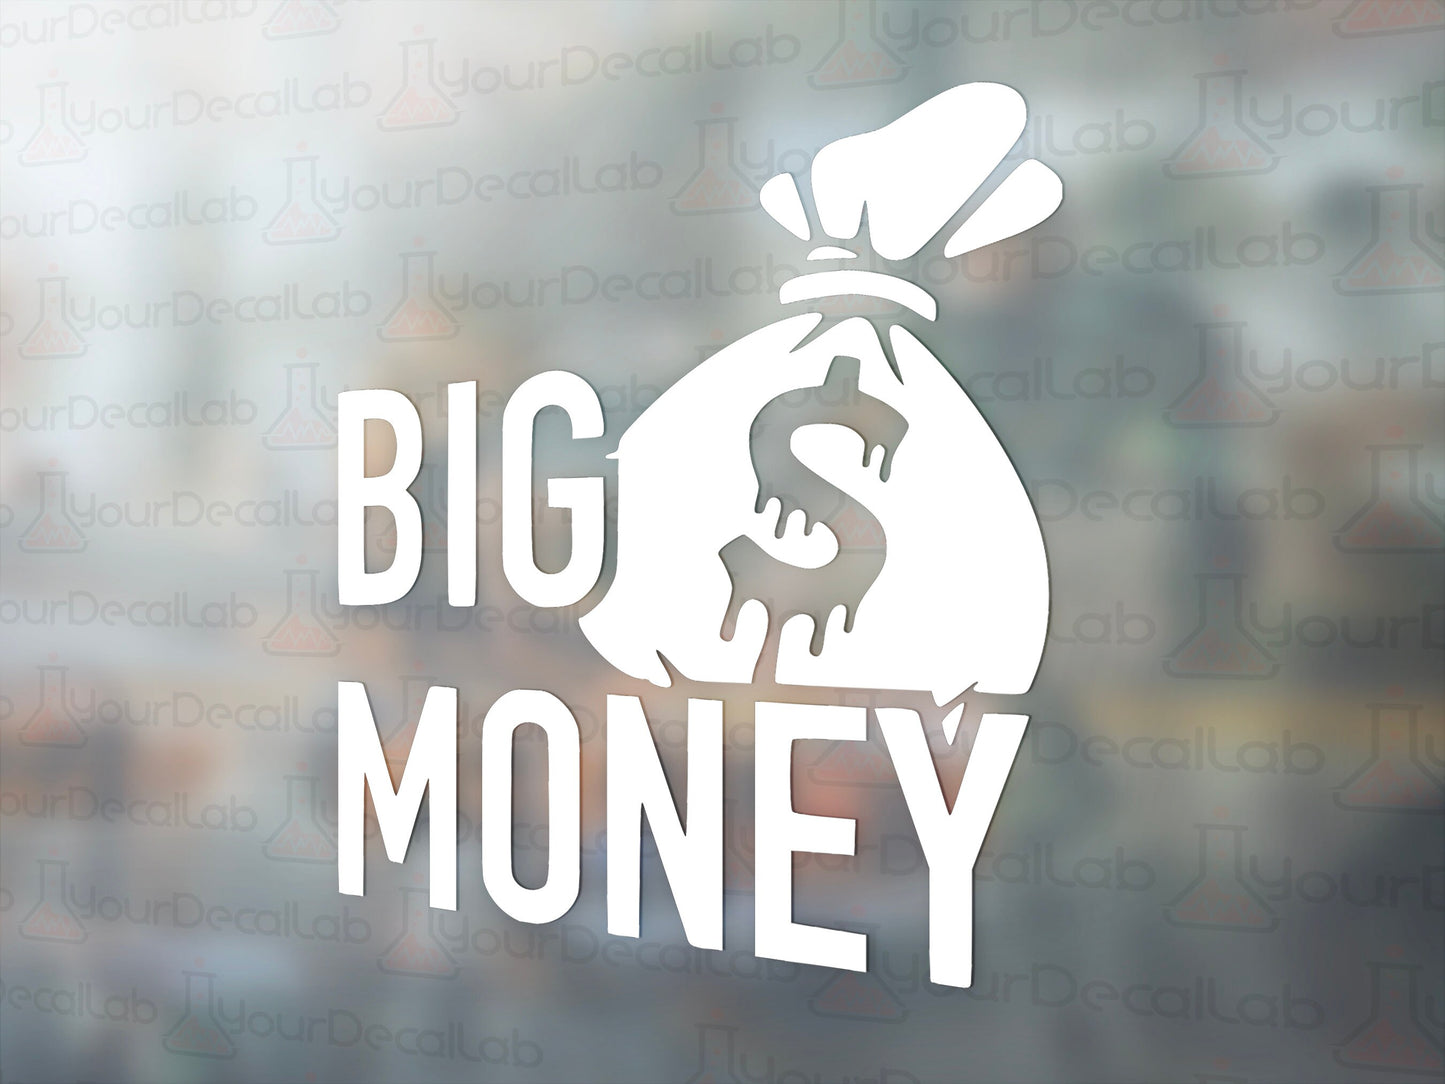 Big Money Bag Decal - Many Colors & Sizes